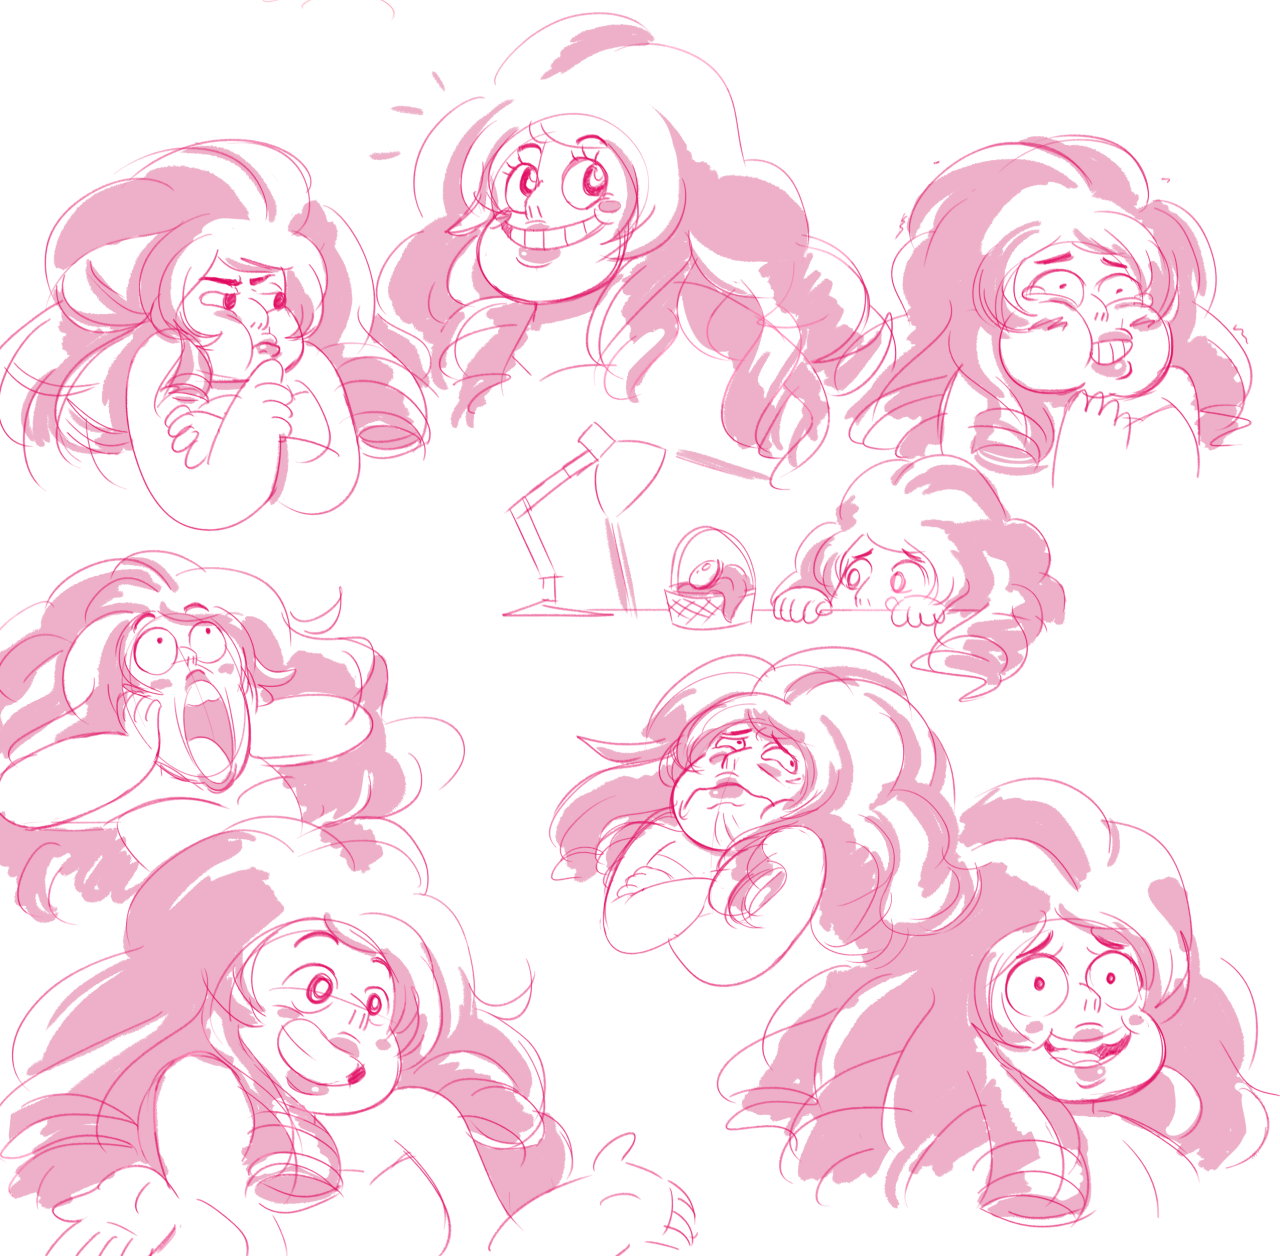 kirliq:today’s warmup is: various Roses with Steven’s expressions  omg sthap!